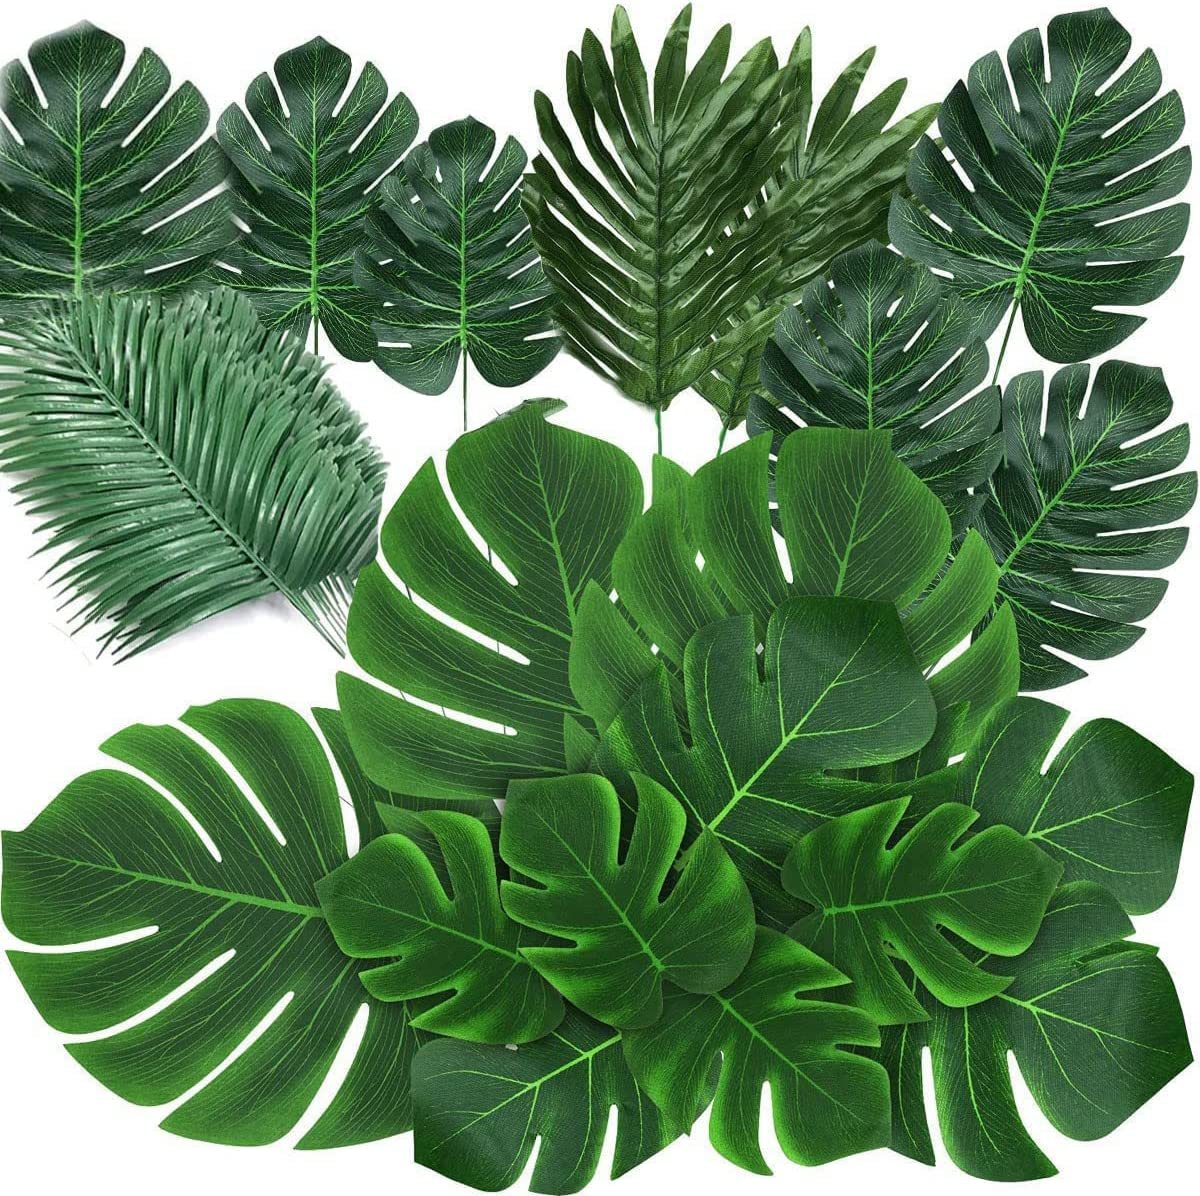 Rose Artificial Monstera Palm Leaves Green Bulk Greenery Tropical, 8Kinds. - $39.98